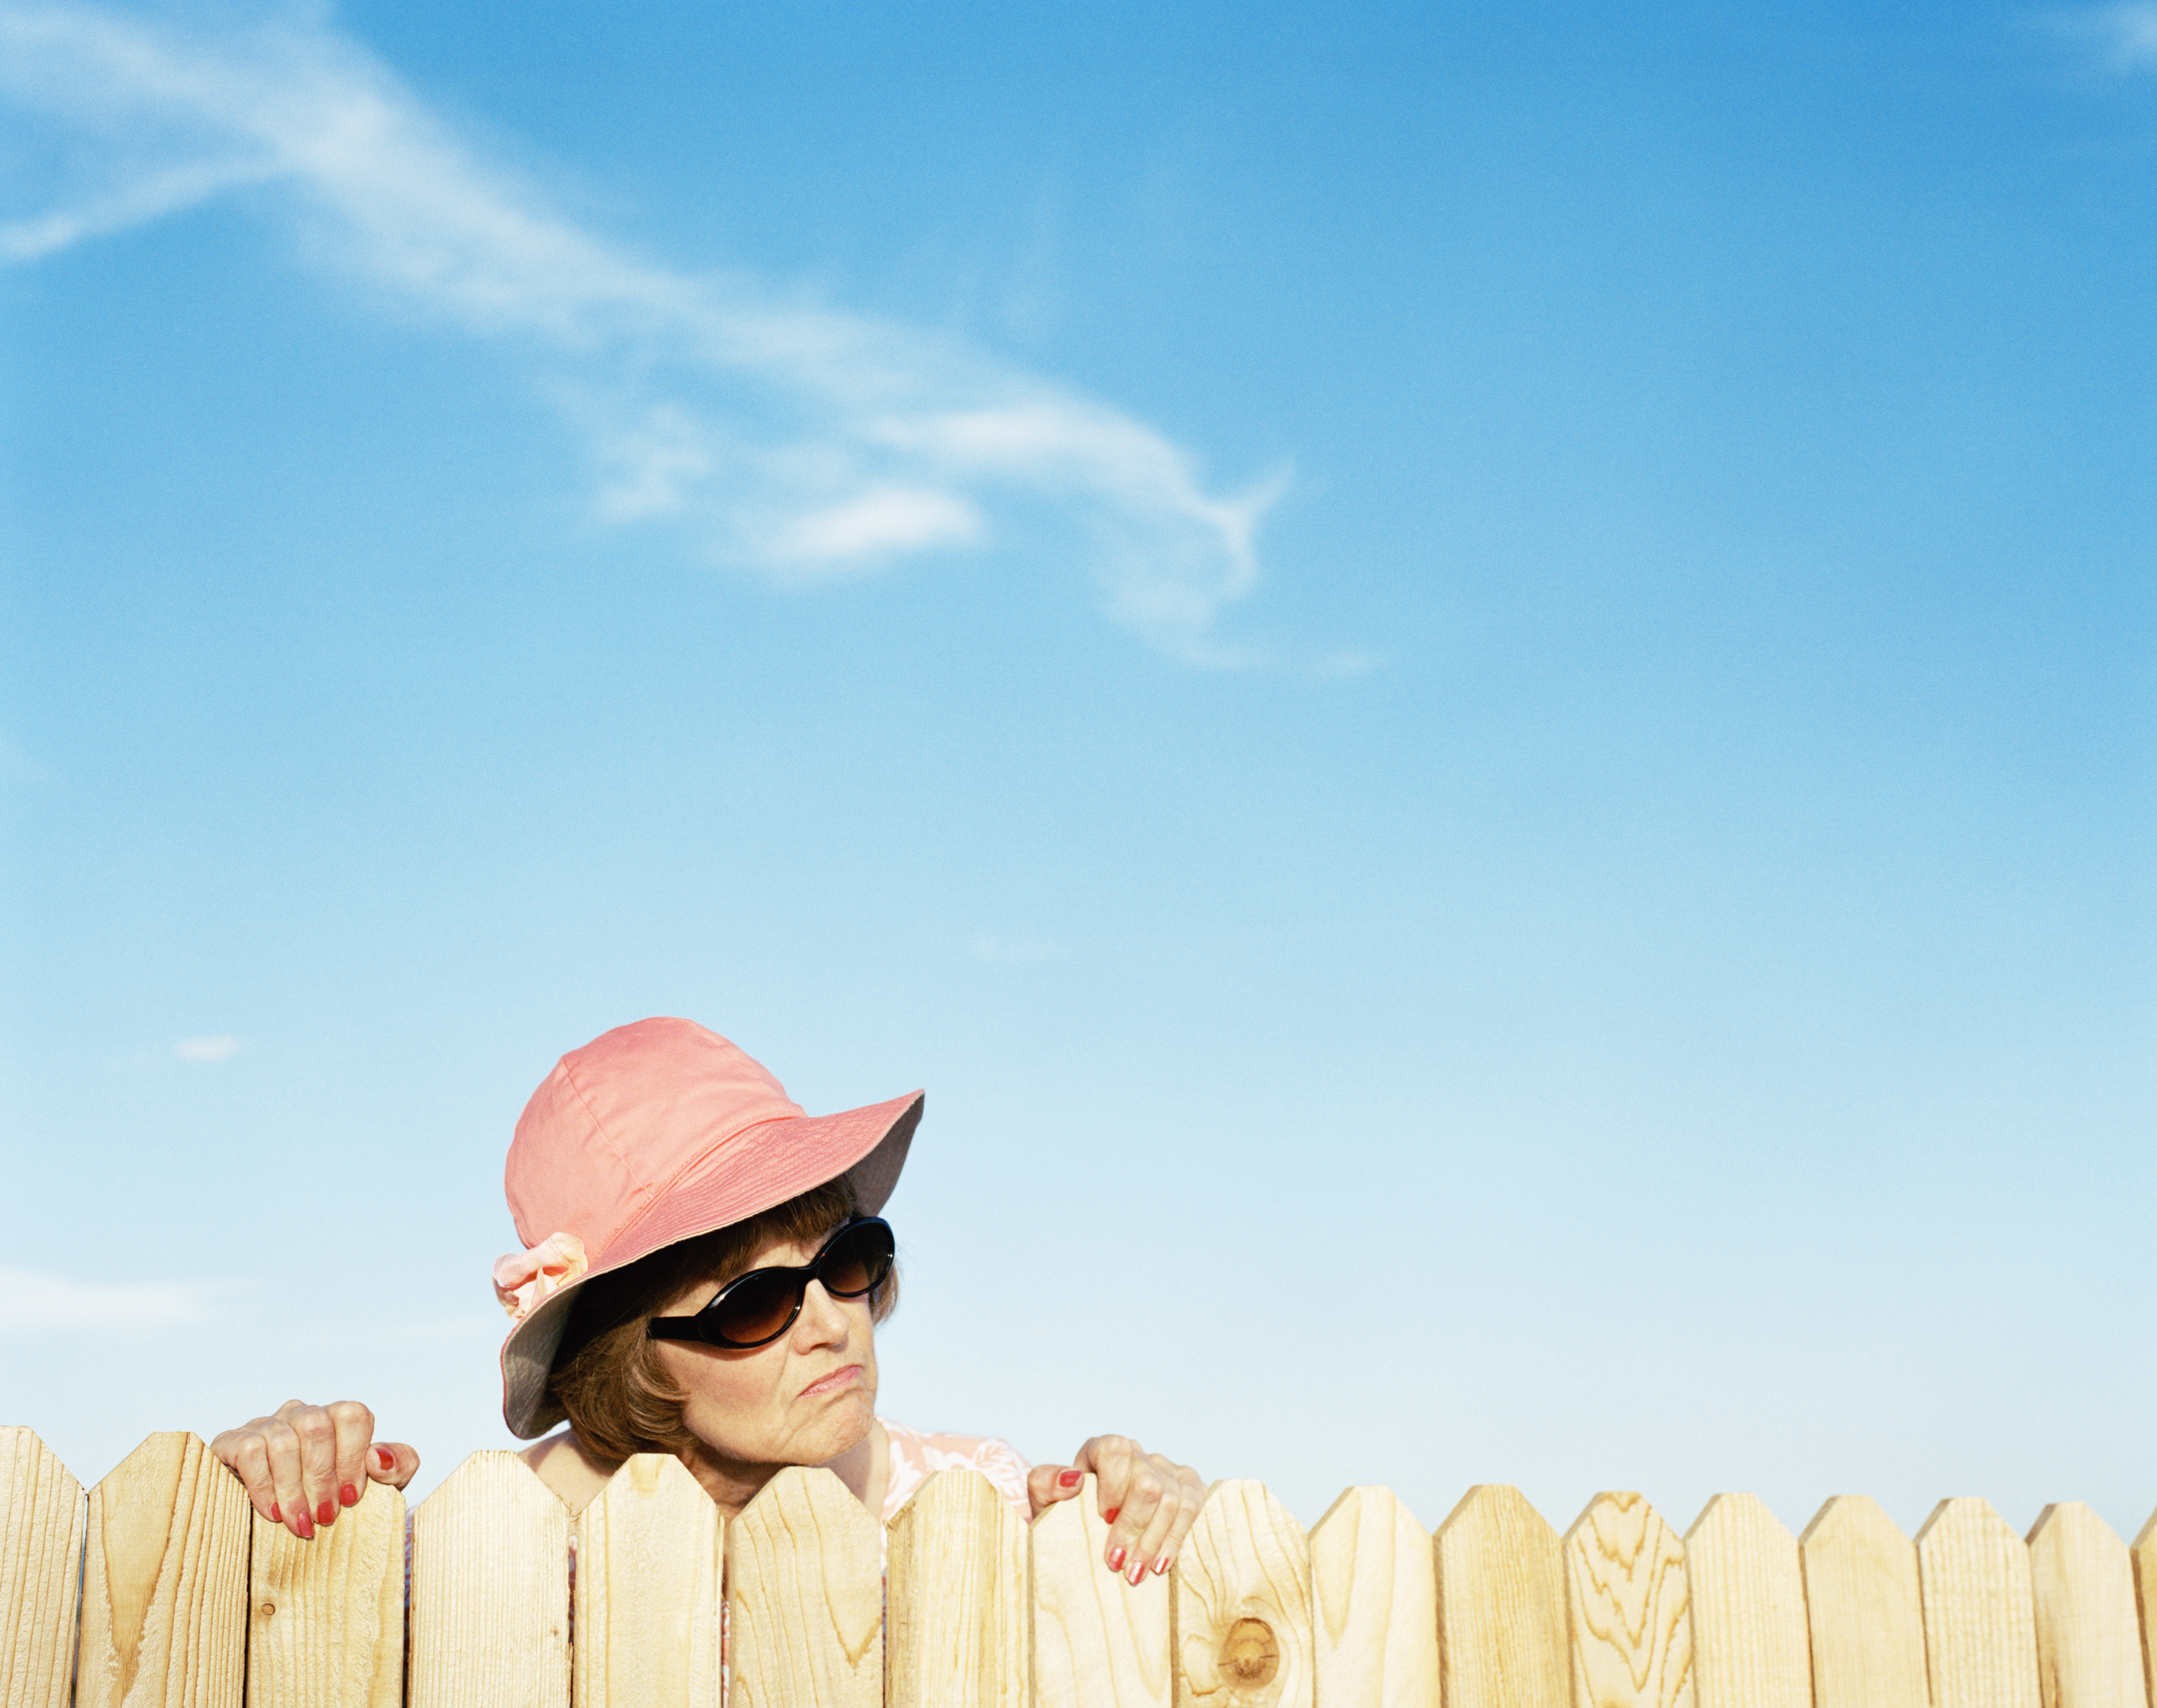 A mature woman looking over the fence | Source: Getty Images